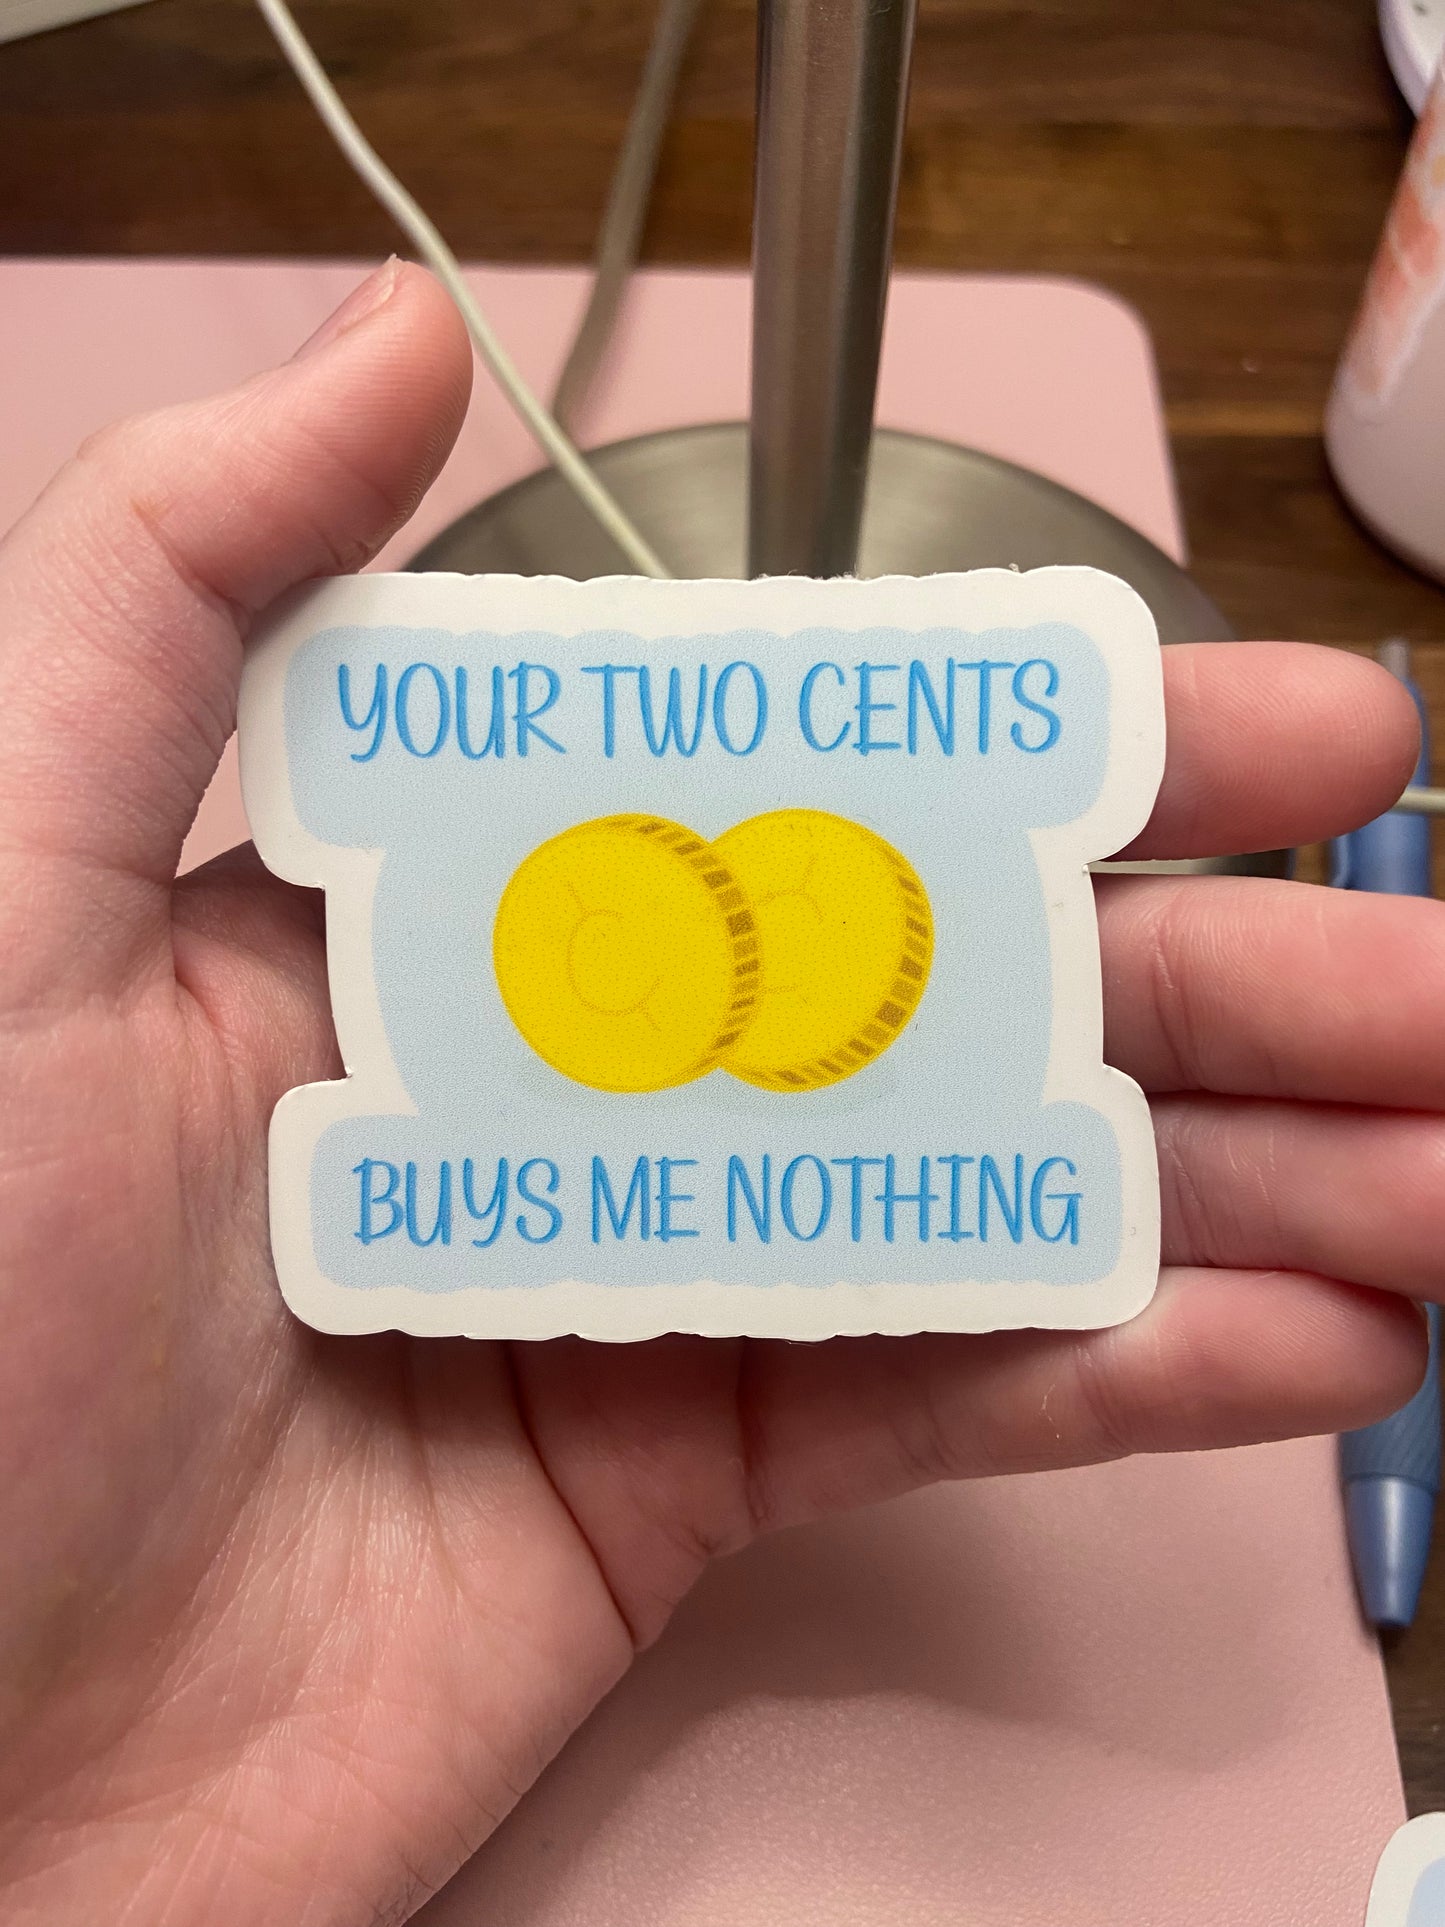 “Your two cents buys me nothing” - sticker